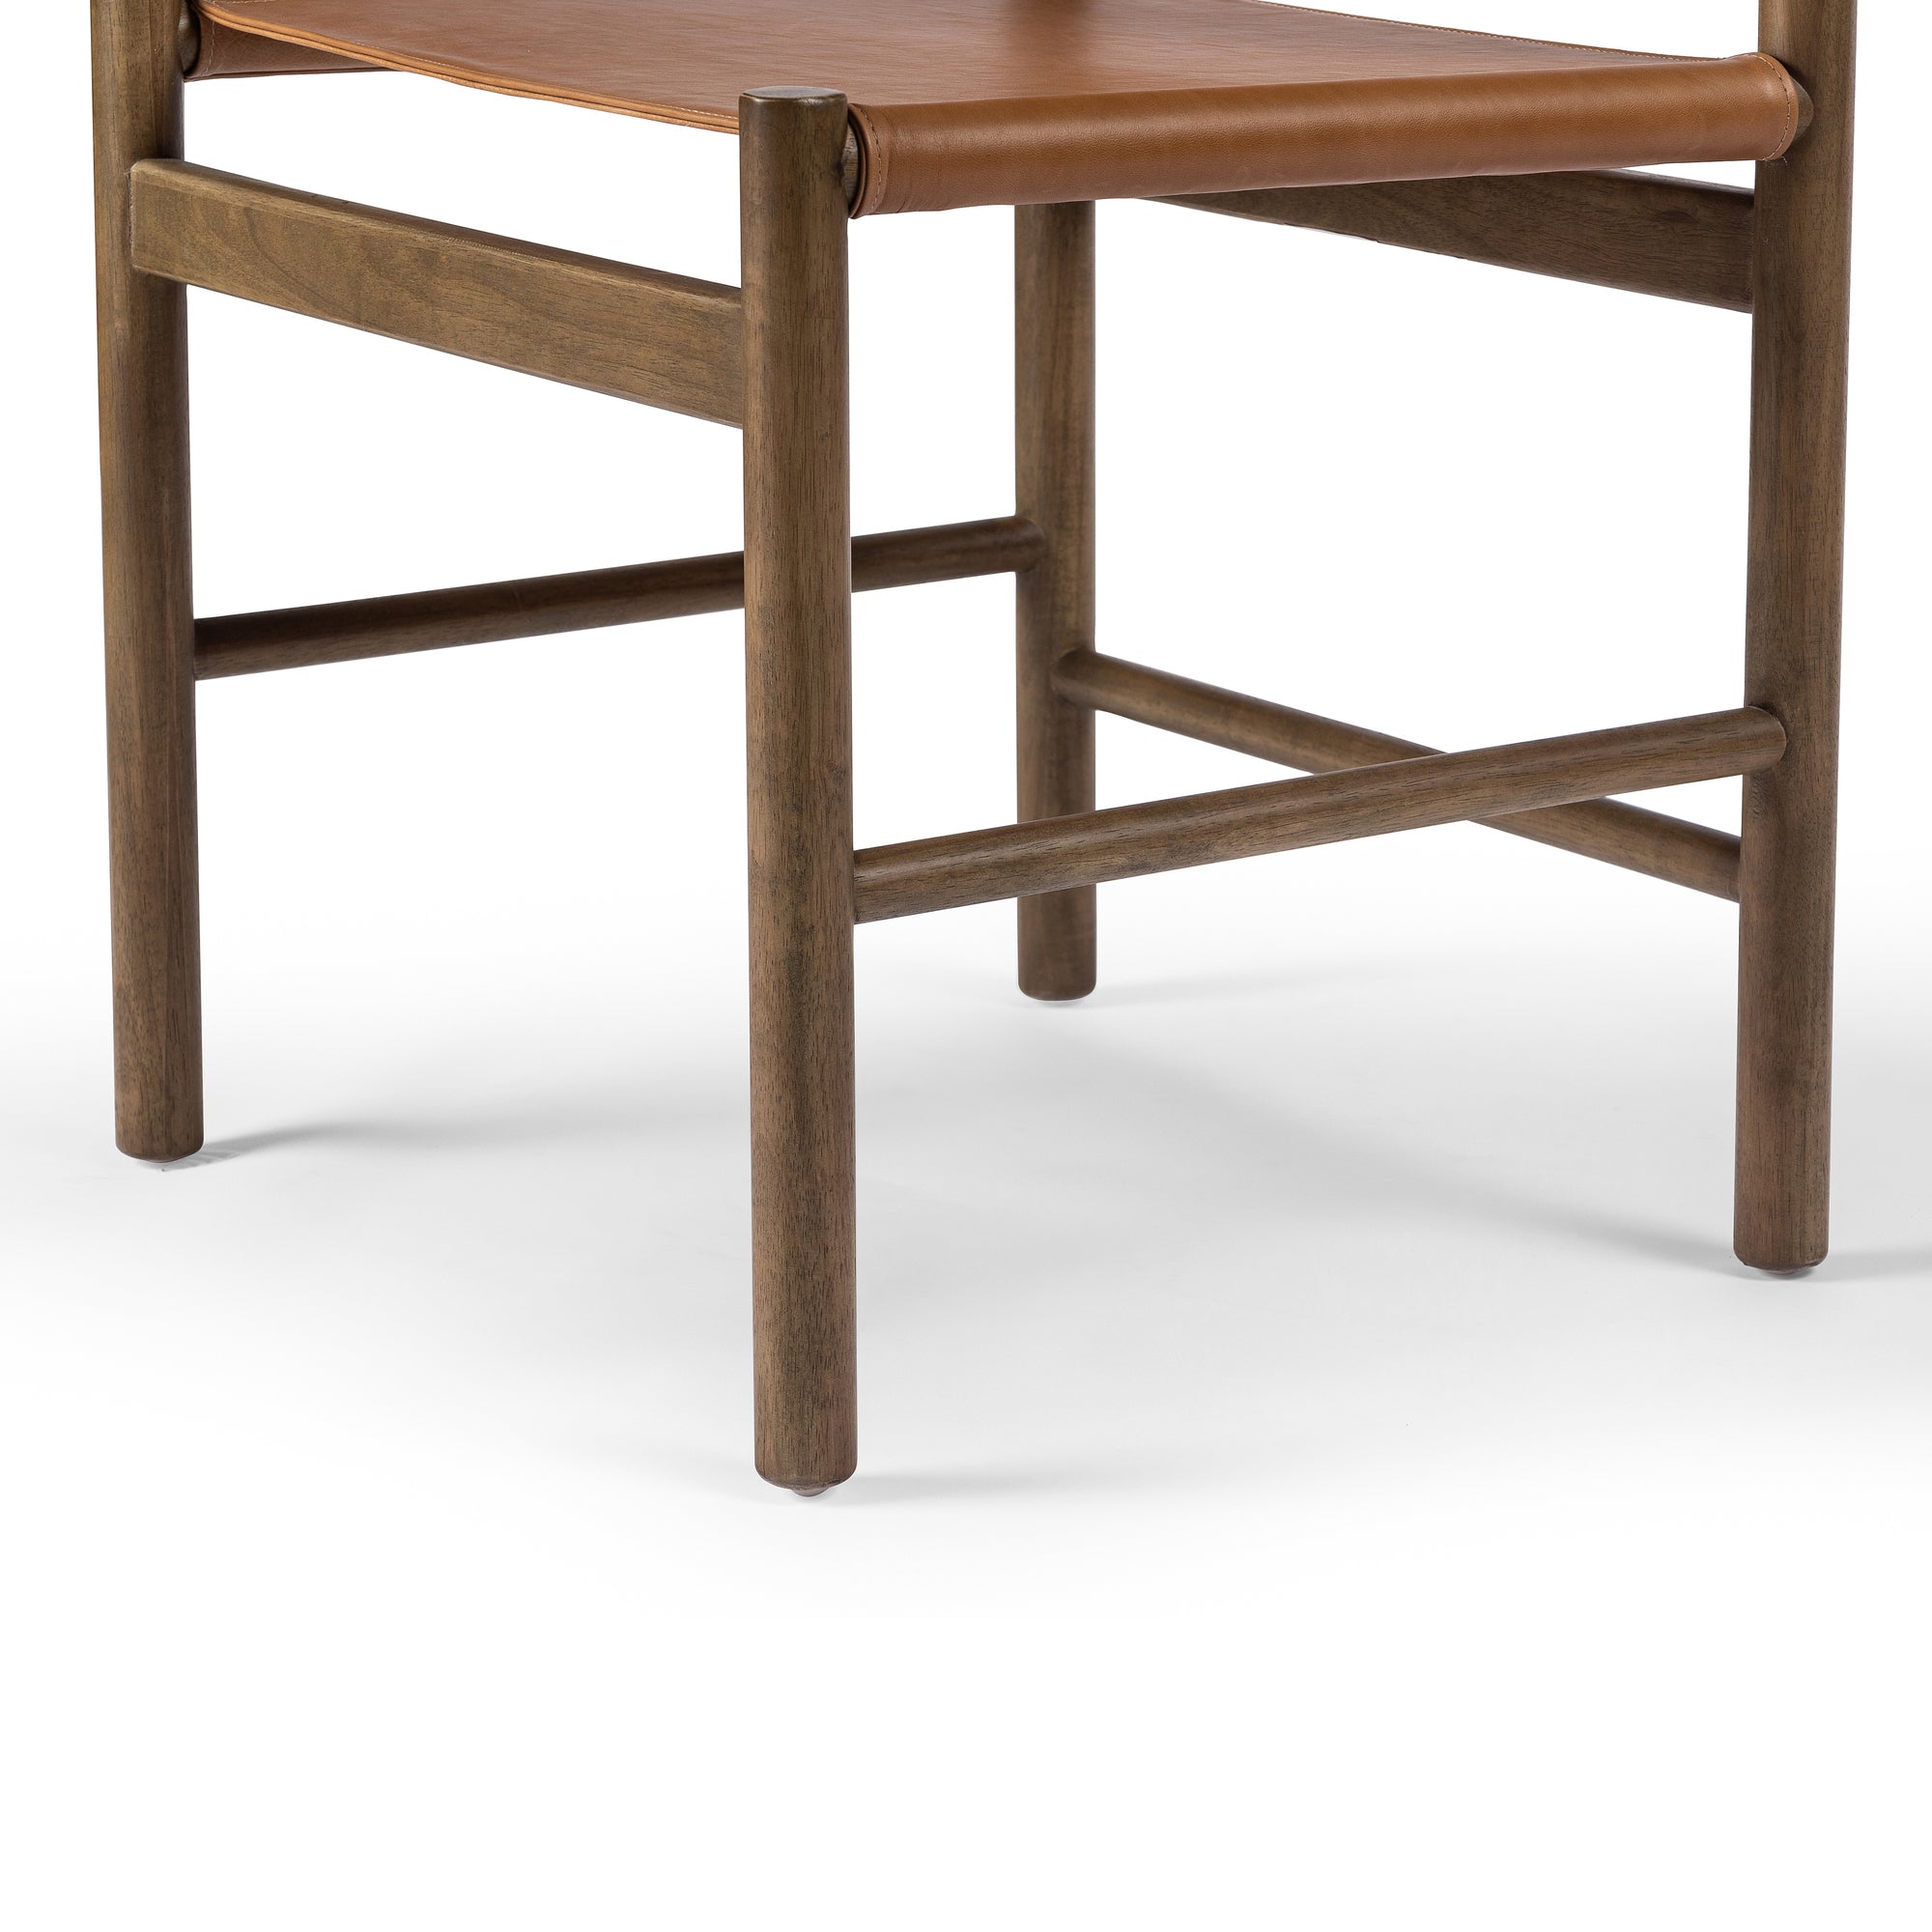 Kena Dining Chair SONOMA BUTTERSCOTCH